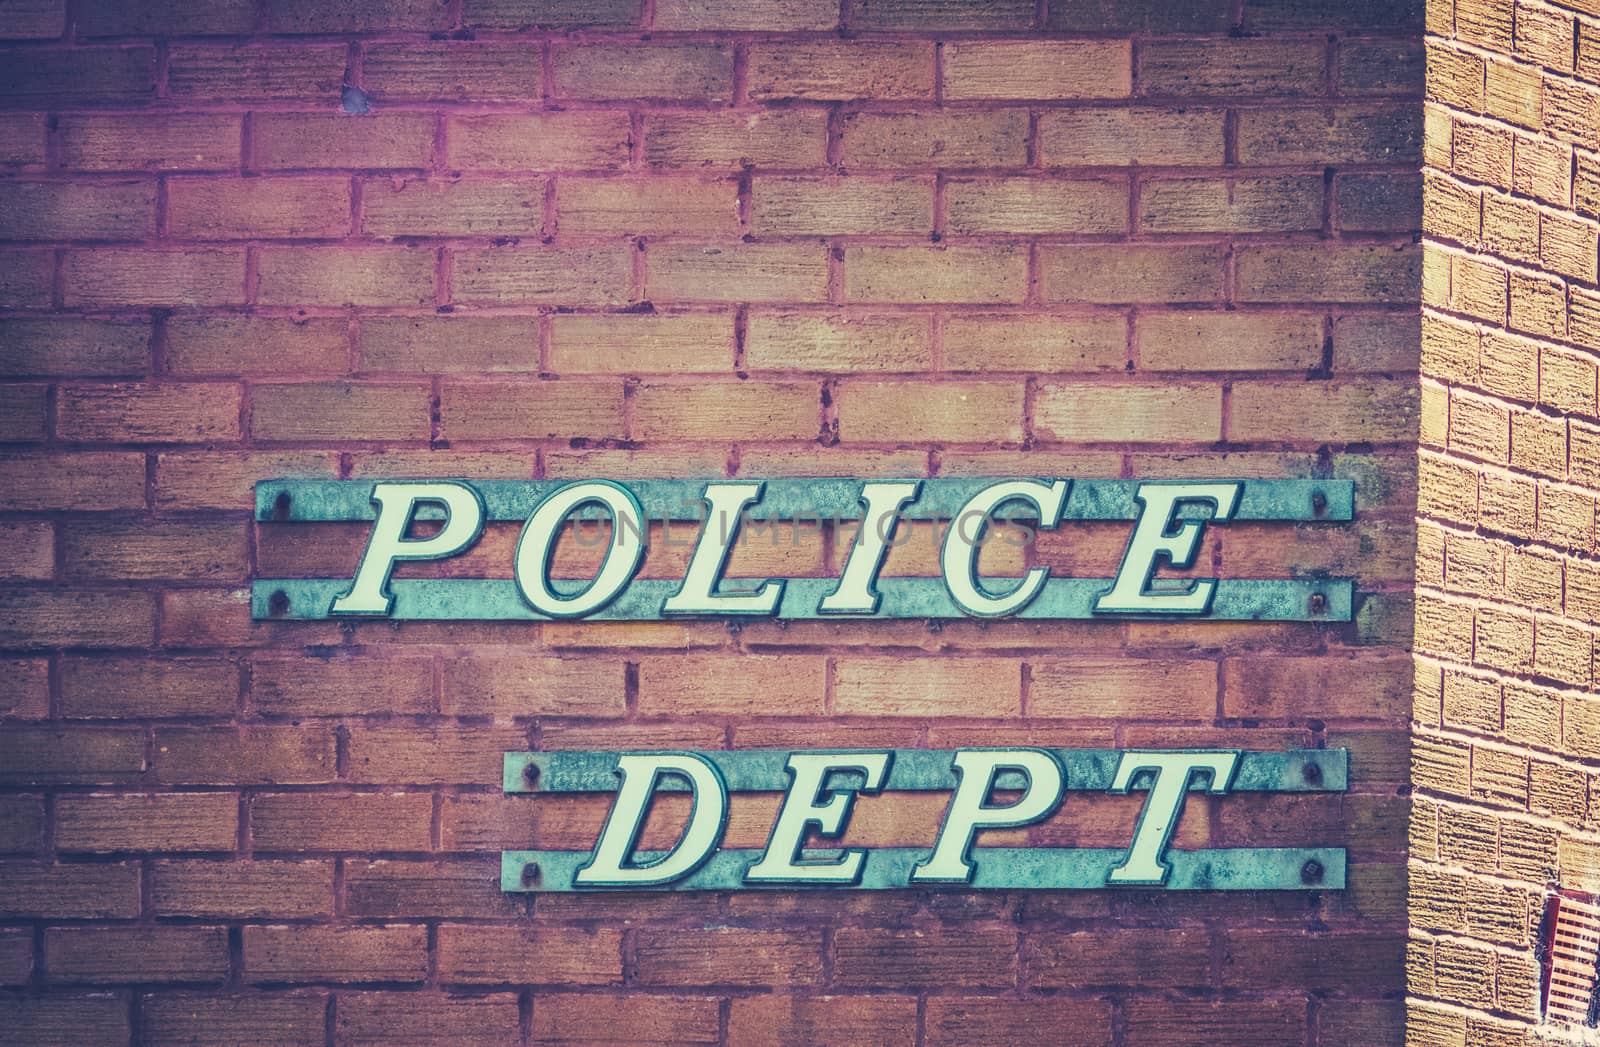 Retro Vintage Sign For A Police Department Or Station On A Red Brick Building In Small Town USA